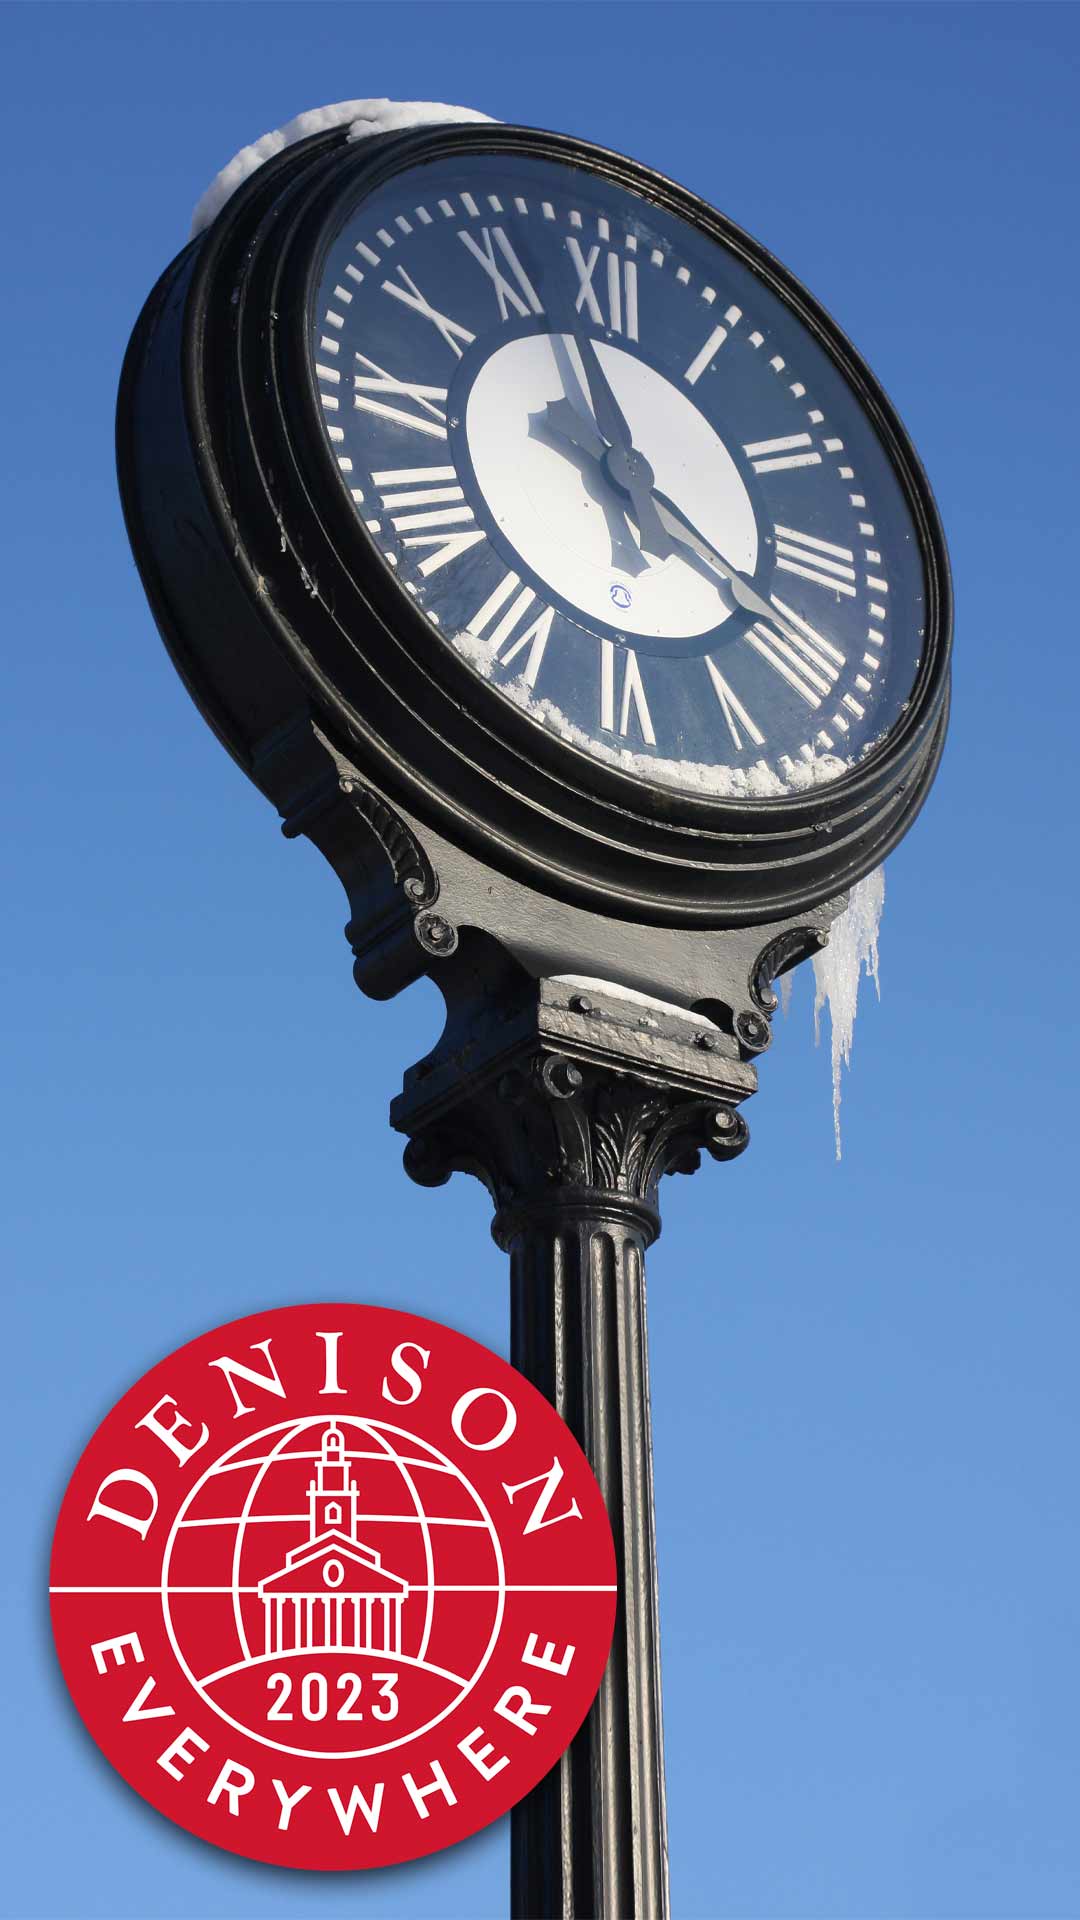 The Denison clock with snow and icicles